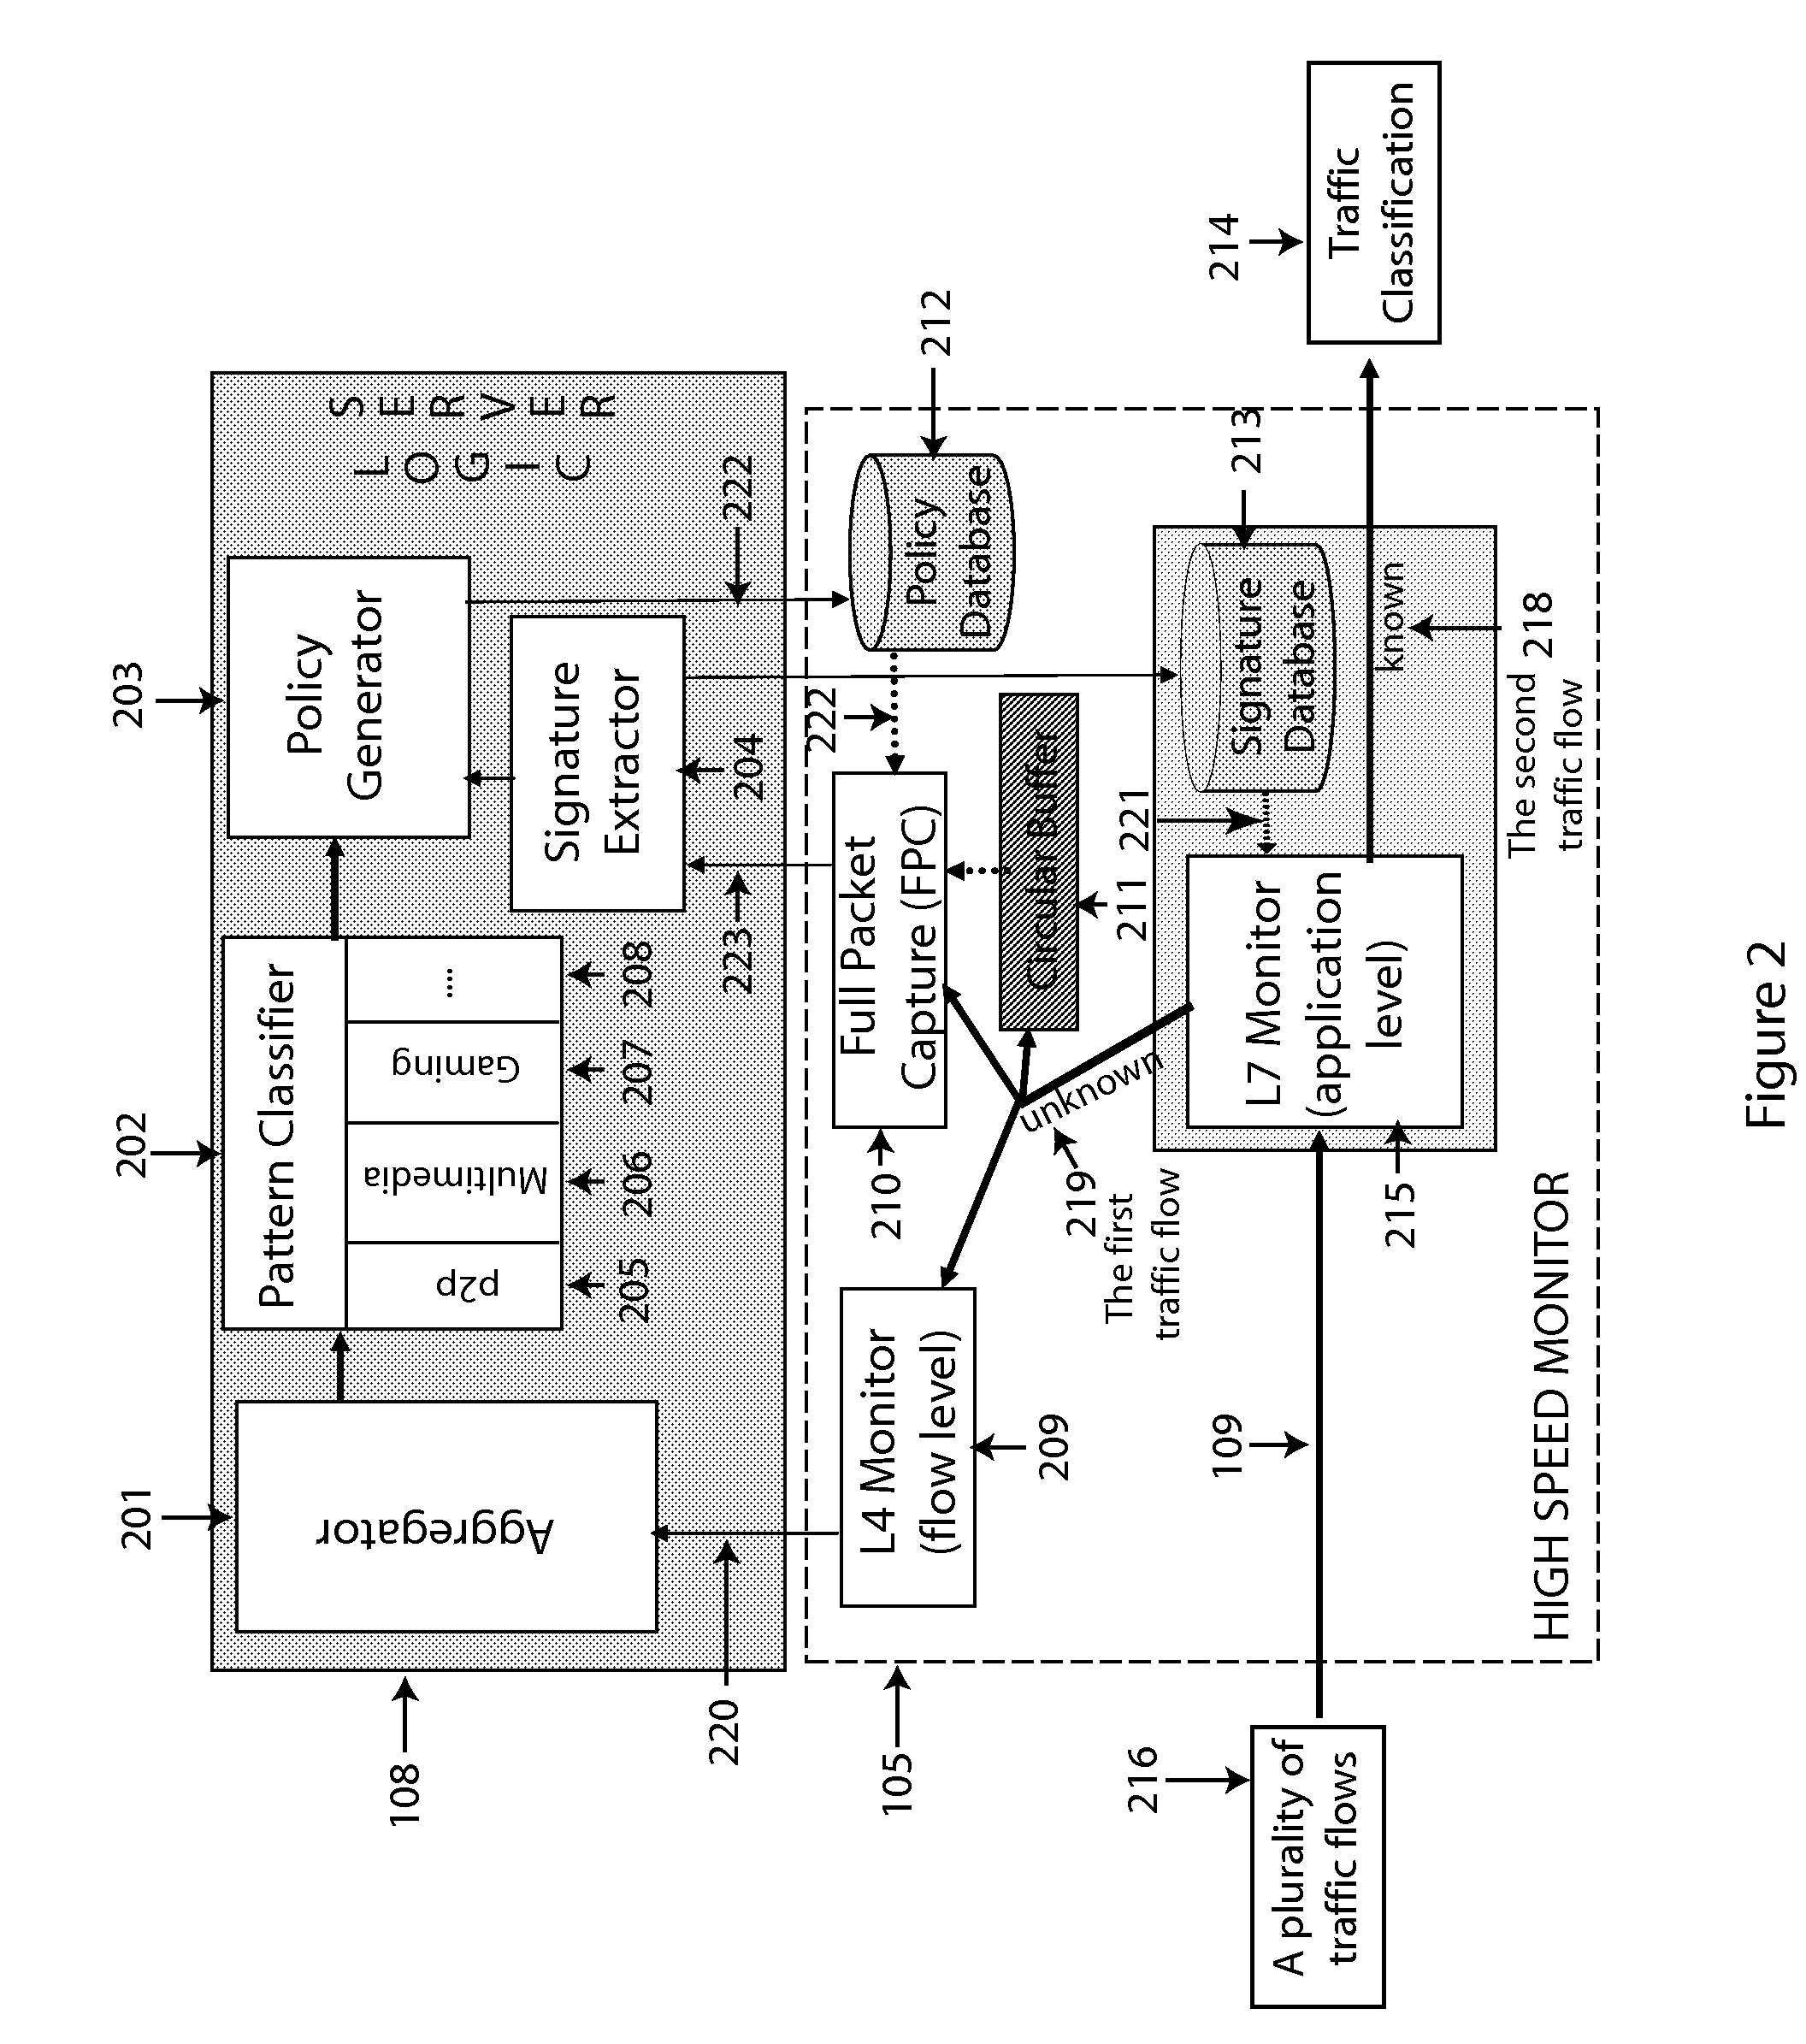 System and method for network traffic management